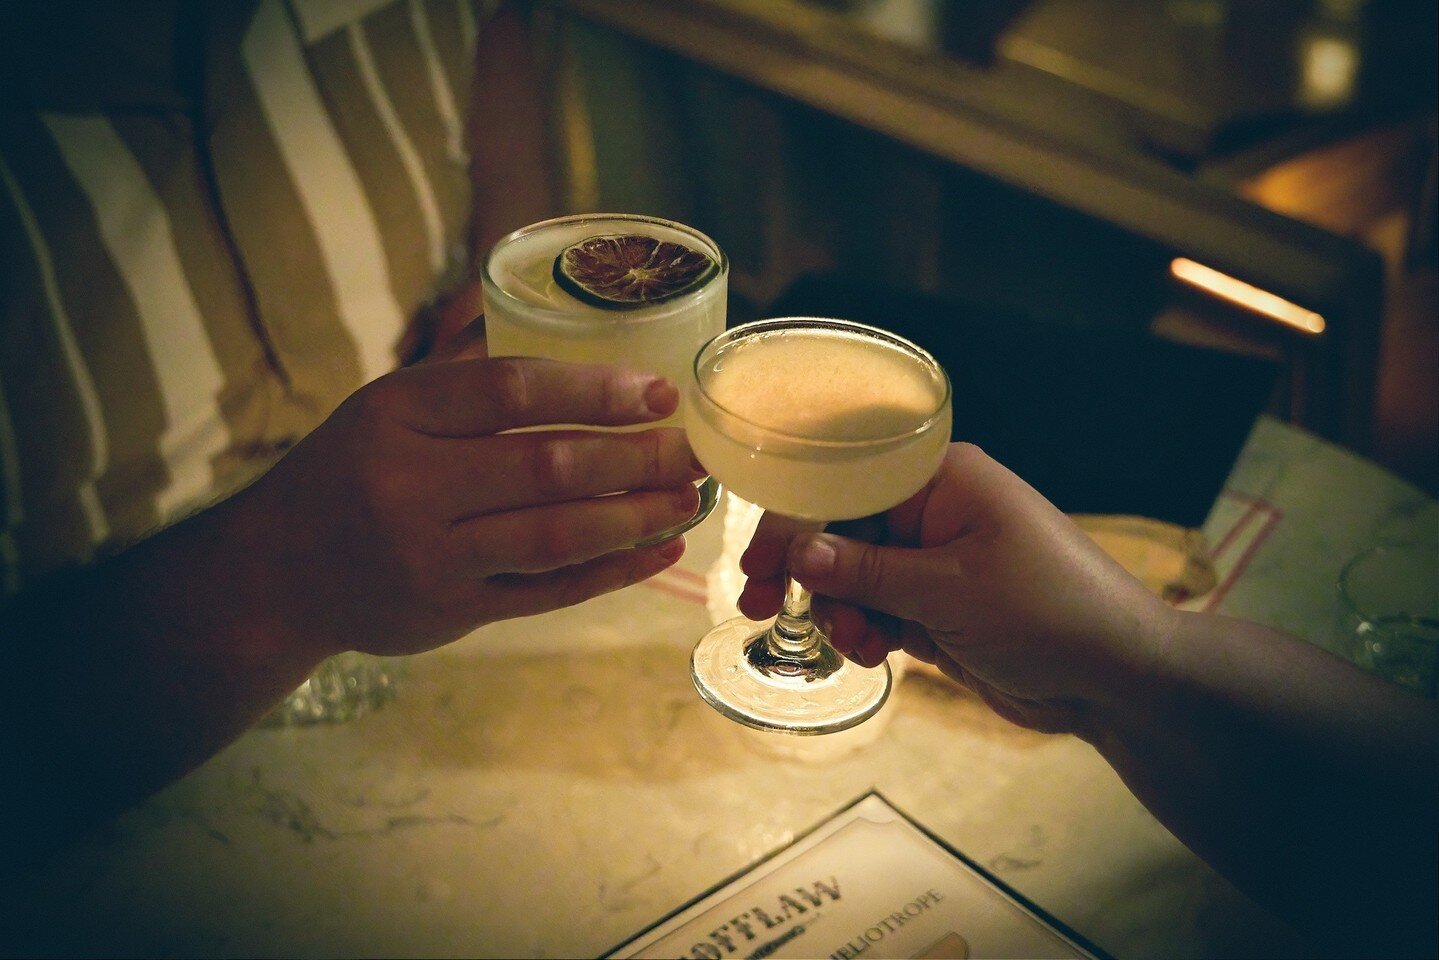 Come sip on some classic cocktails during Scofflaw&rsquo;s Happy Hour! 5-7pm every Sunday-Thursday! Or peruse our new Spring Cocktail menu for your new favorite beverage.⁠
📷: @rentauskas⁠
⁠
#scofflaw #scofflawchicago #logansquare #chicagococktails #